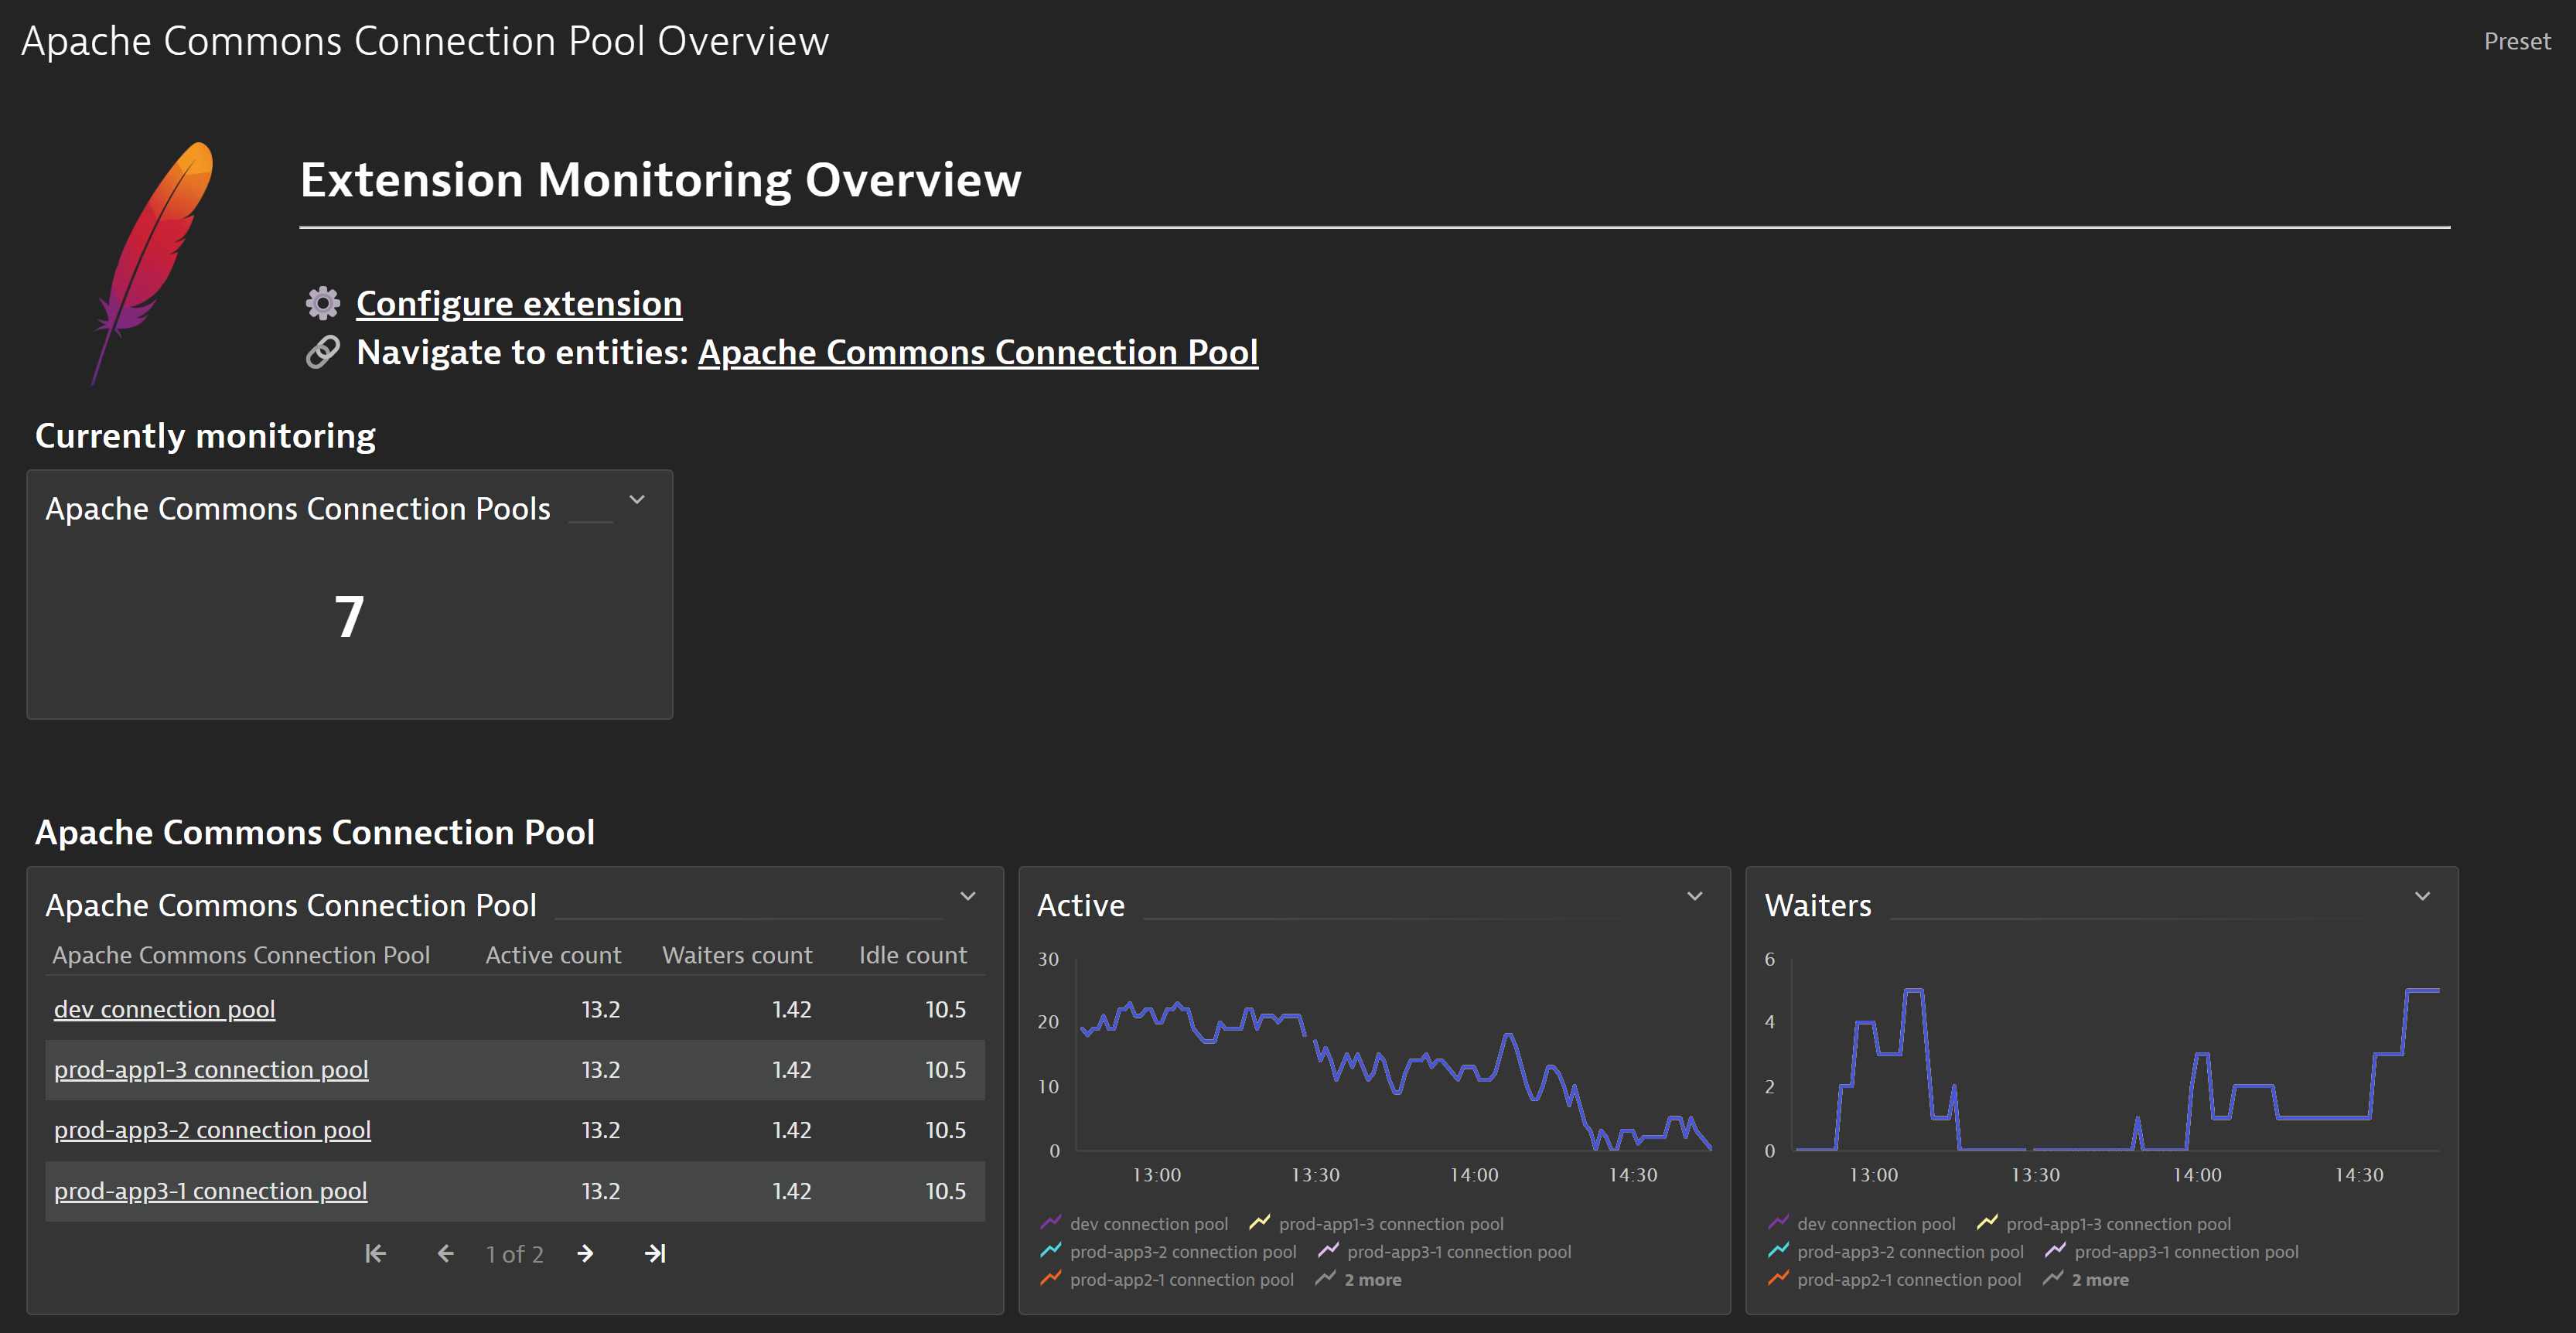 Built-in overview dashboard to quickly access your Apache Commons Connection Pools metrics